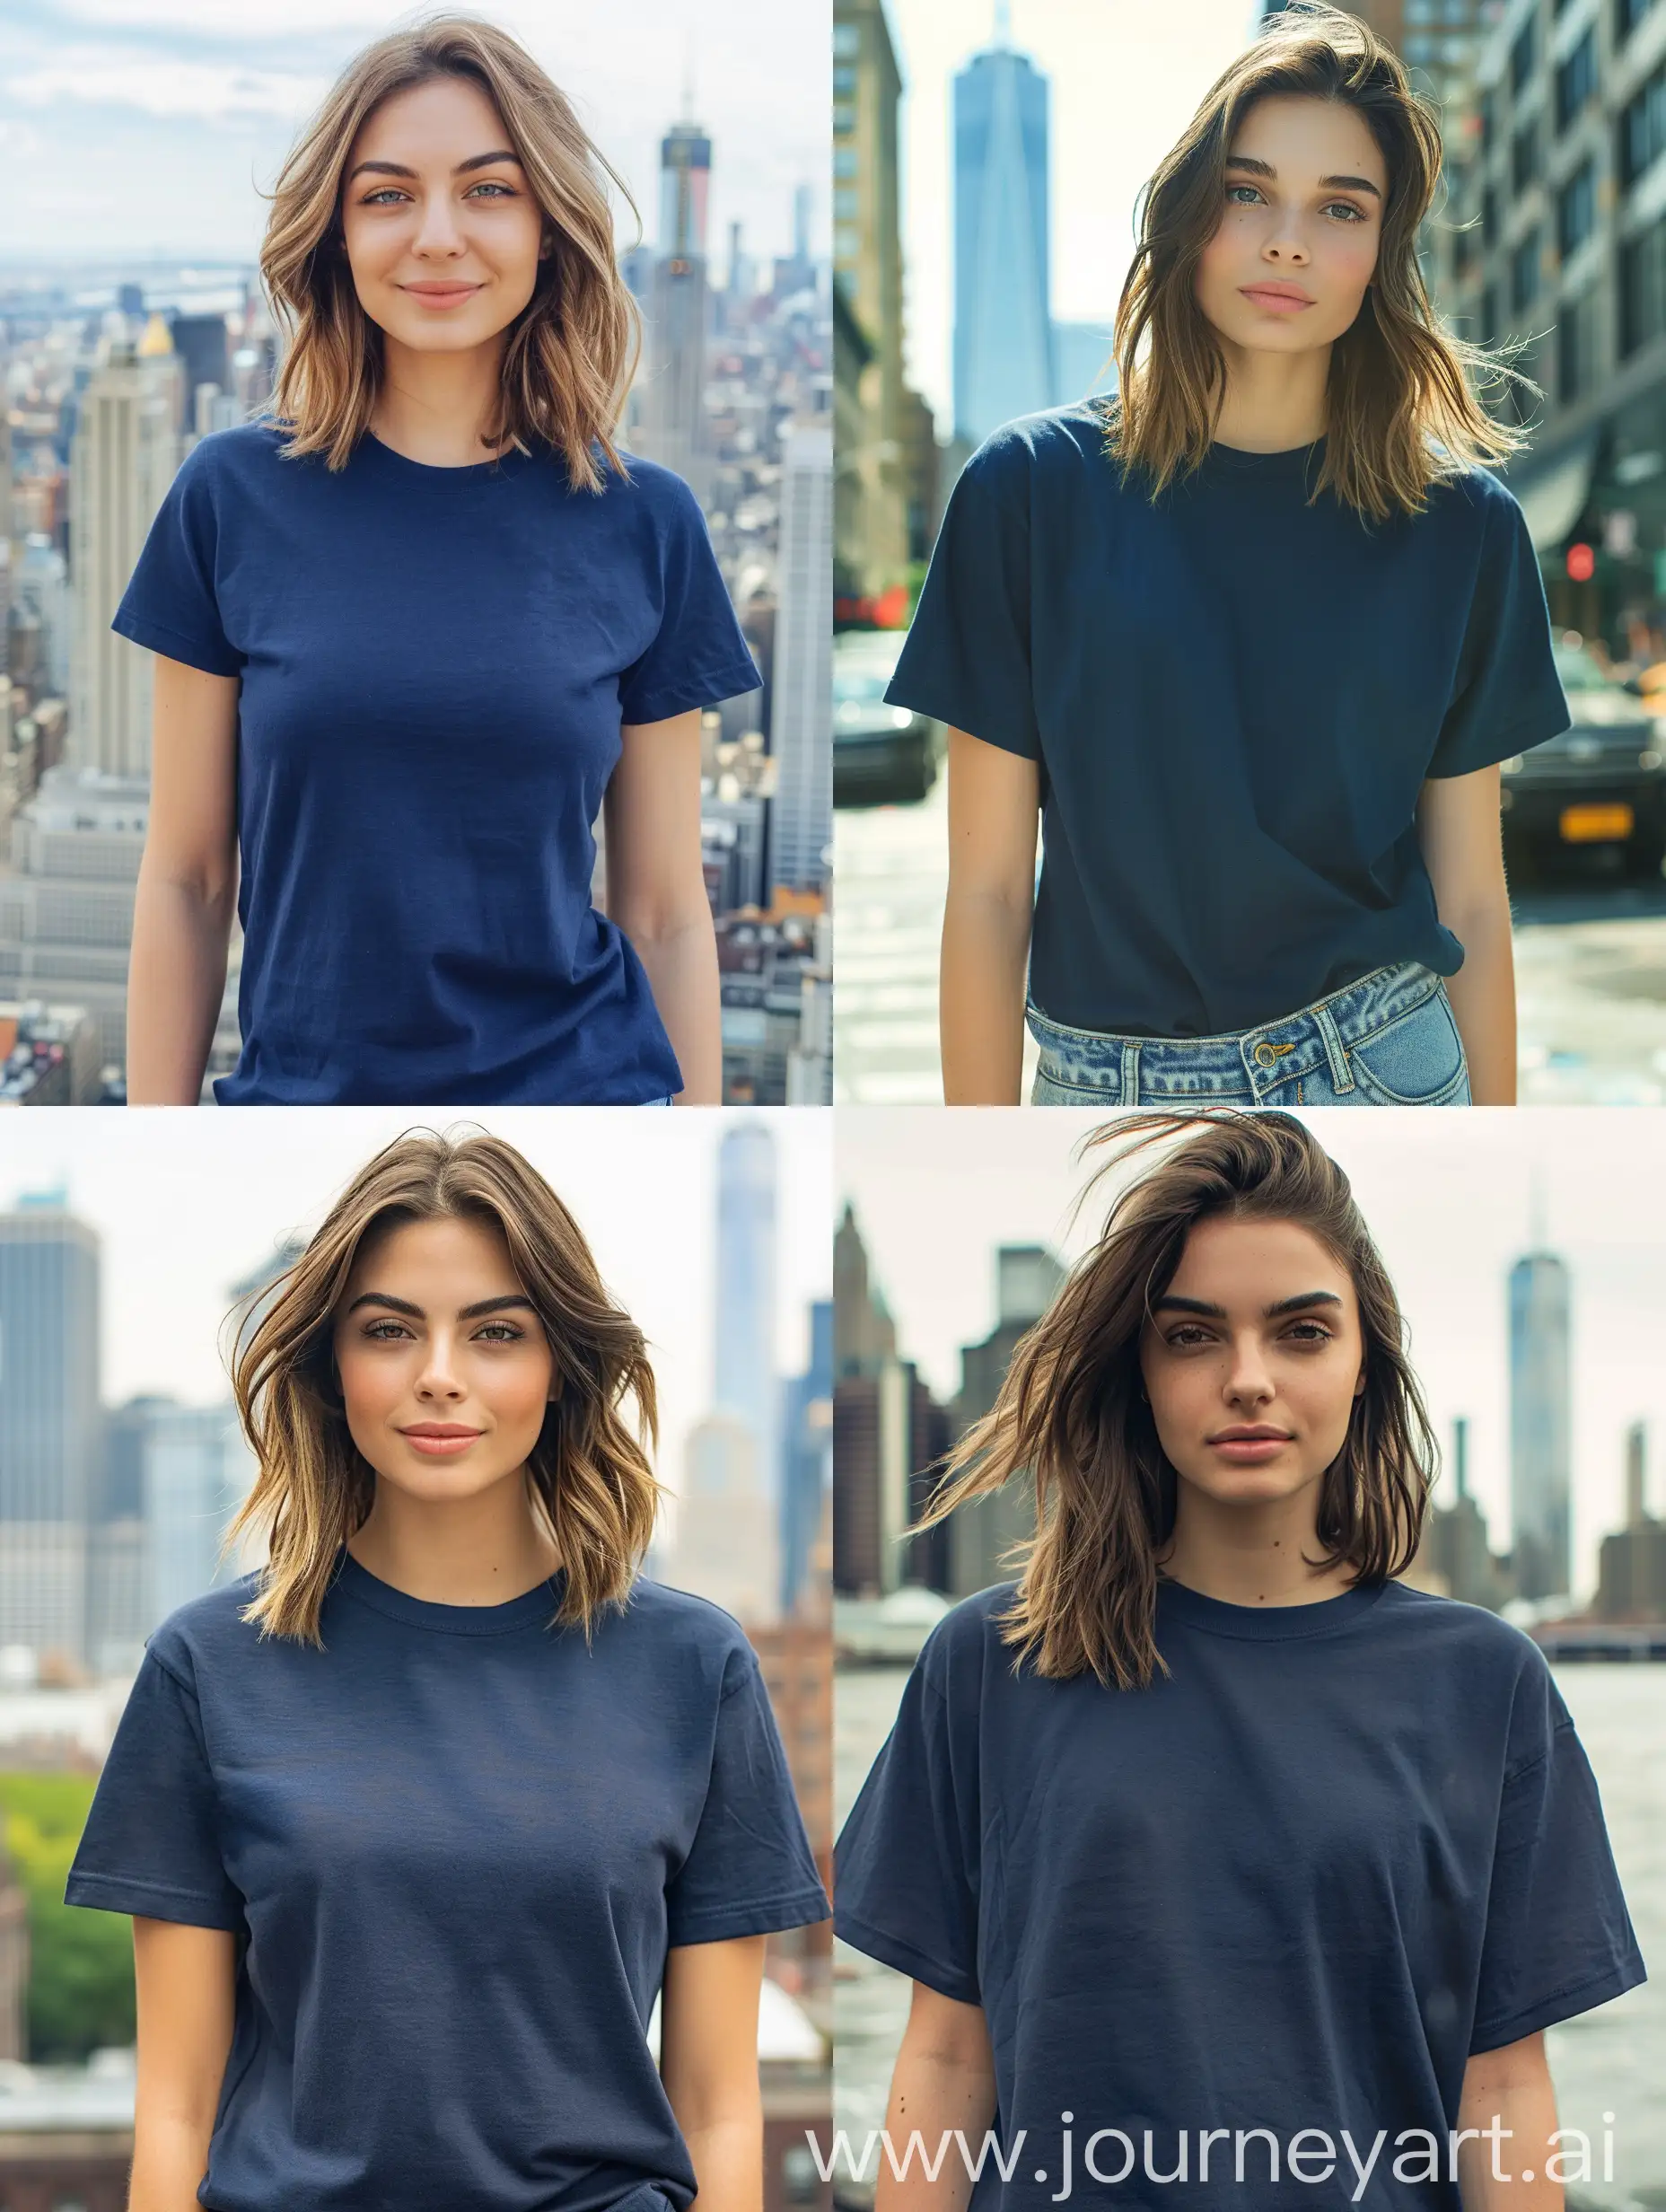 showing a real photo, full length of t-shirt, a beautiful, 22 year old woman with shoulder length hair, wearing a blank, navy blue Bella Canvas 3001 t-shirt with a longer short sleeves, crew neck, lower manhattan in the background